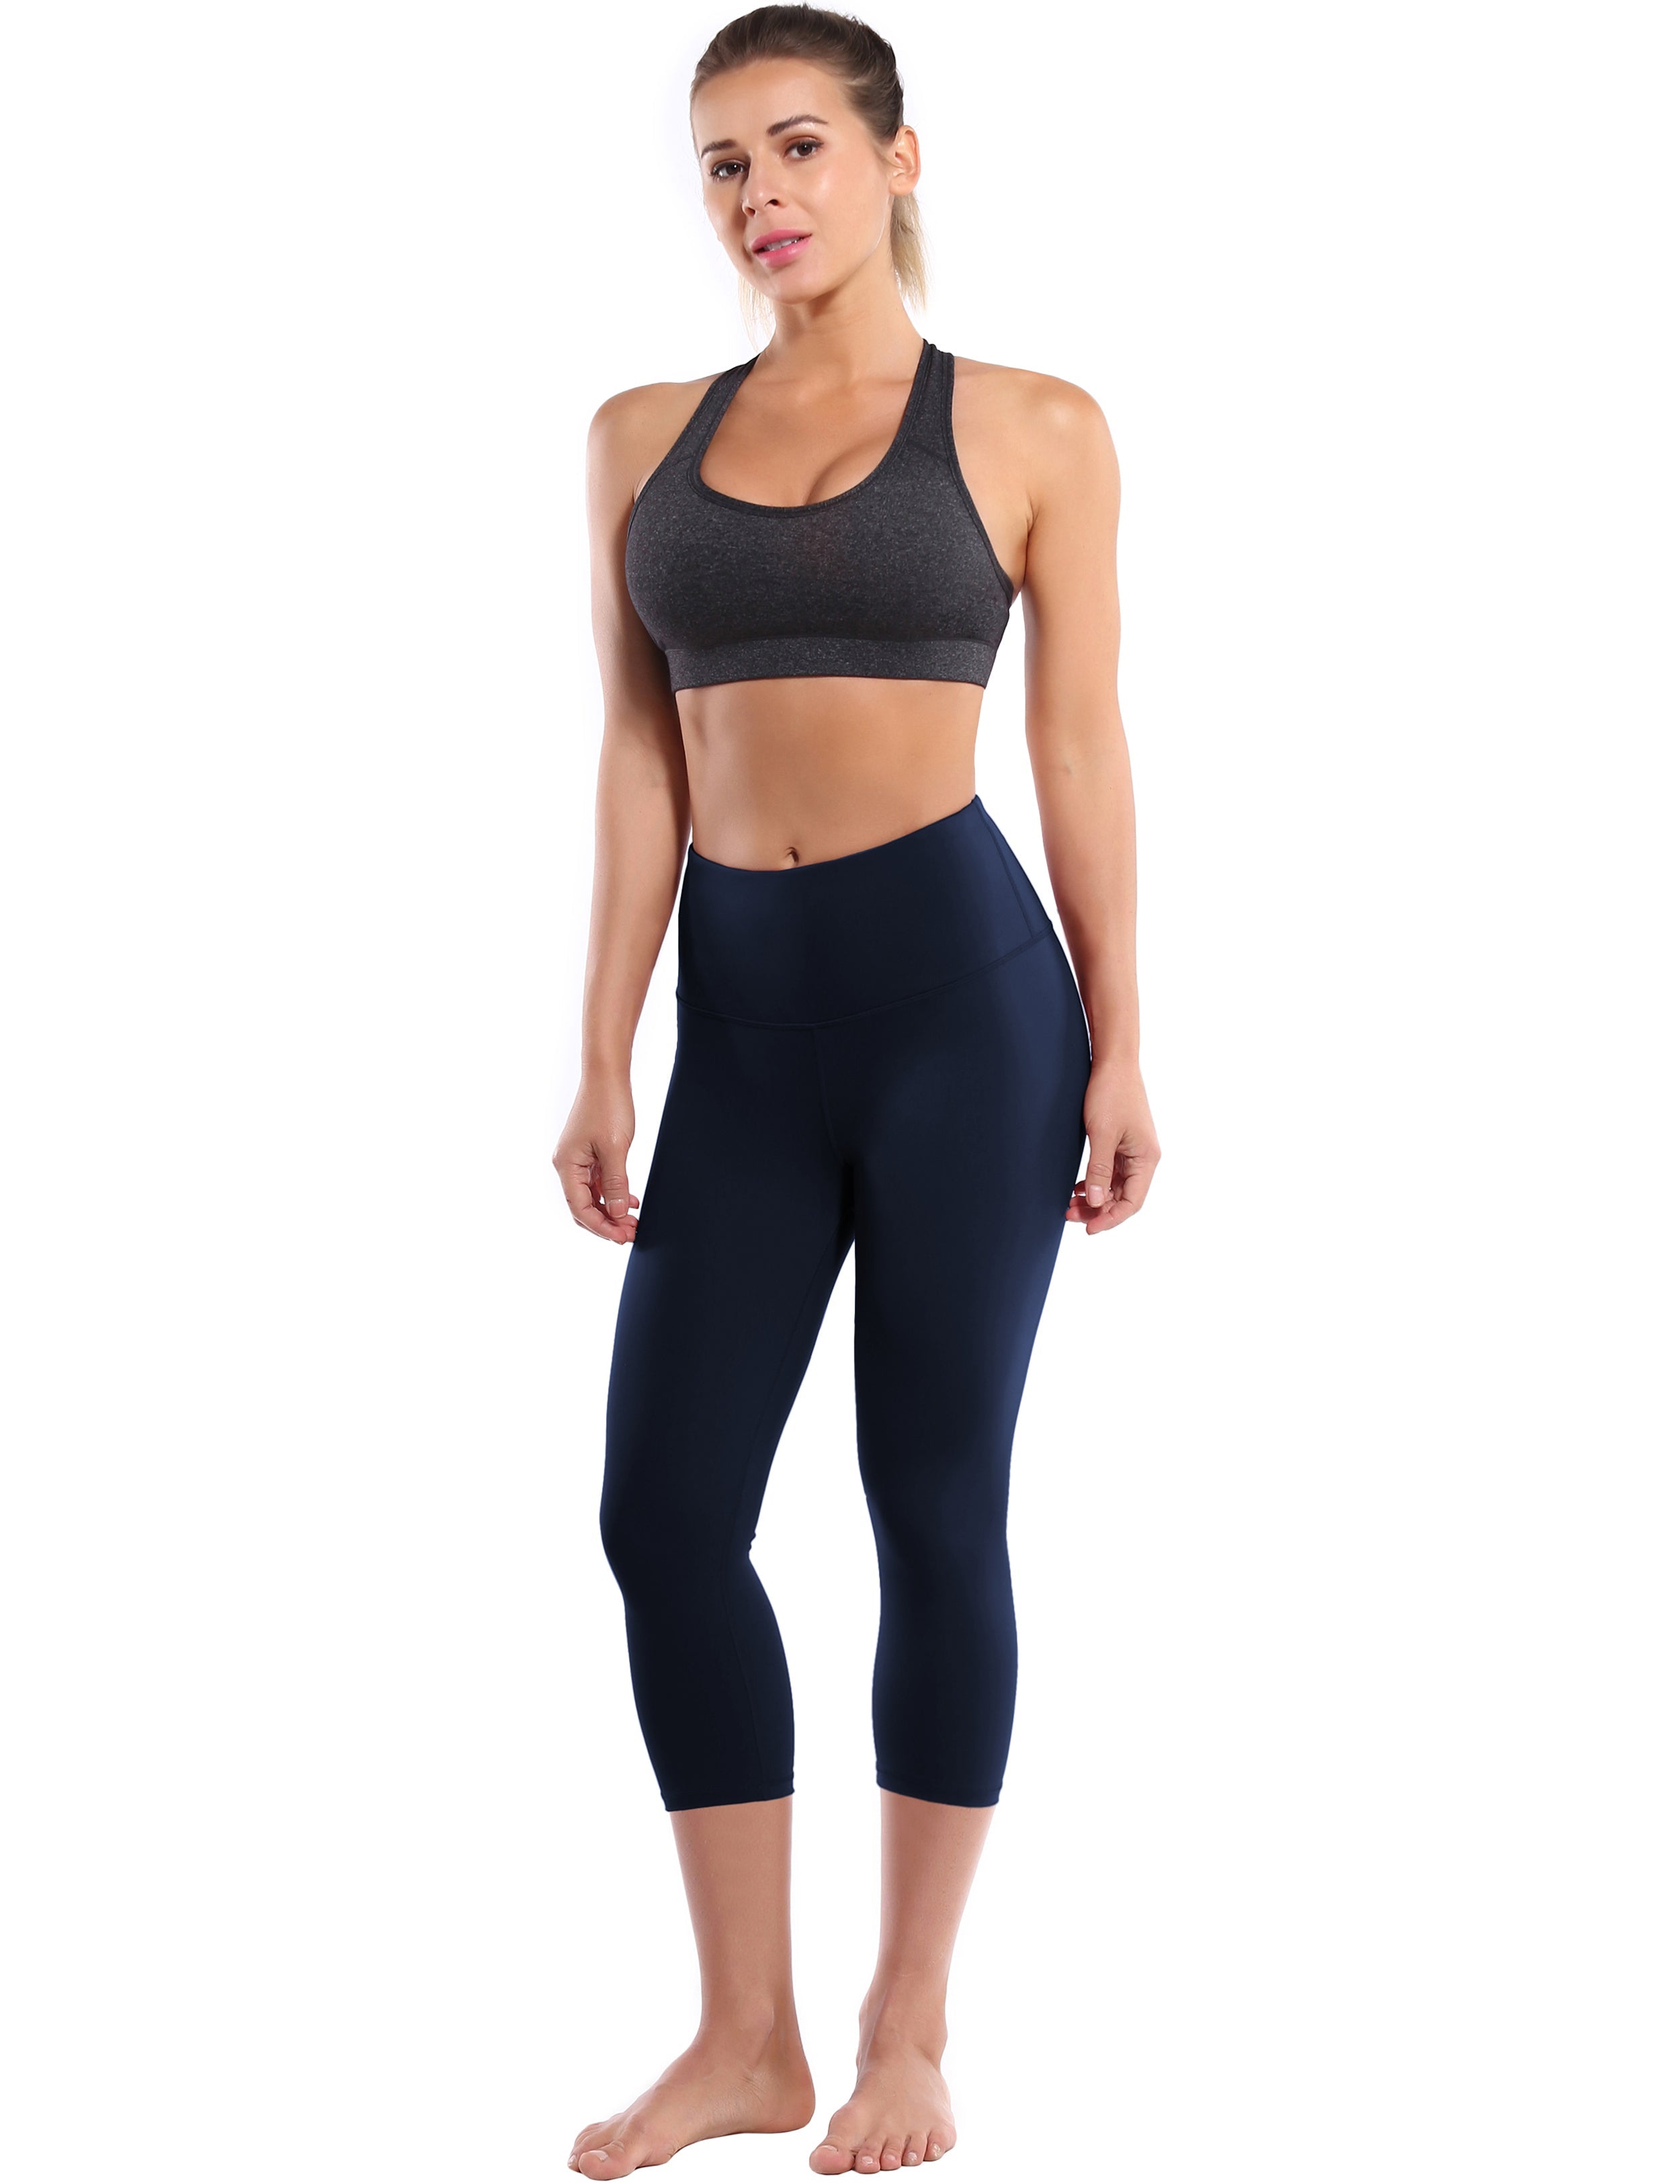 19" High Waist Crop Tight Capris darknavy 75%Nylon/25%Spandex Fabric doesn't attract lint easily 4-way stretch No see-through Moisture-wicking Tummy control Inner pocket